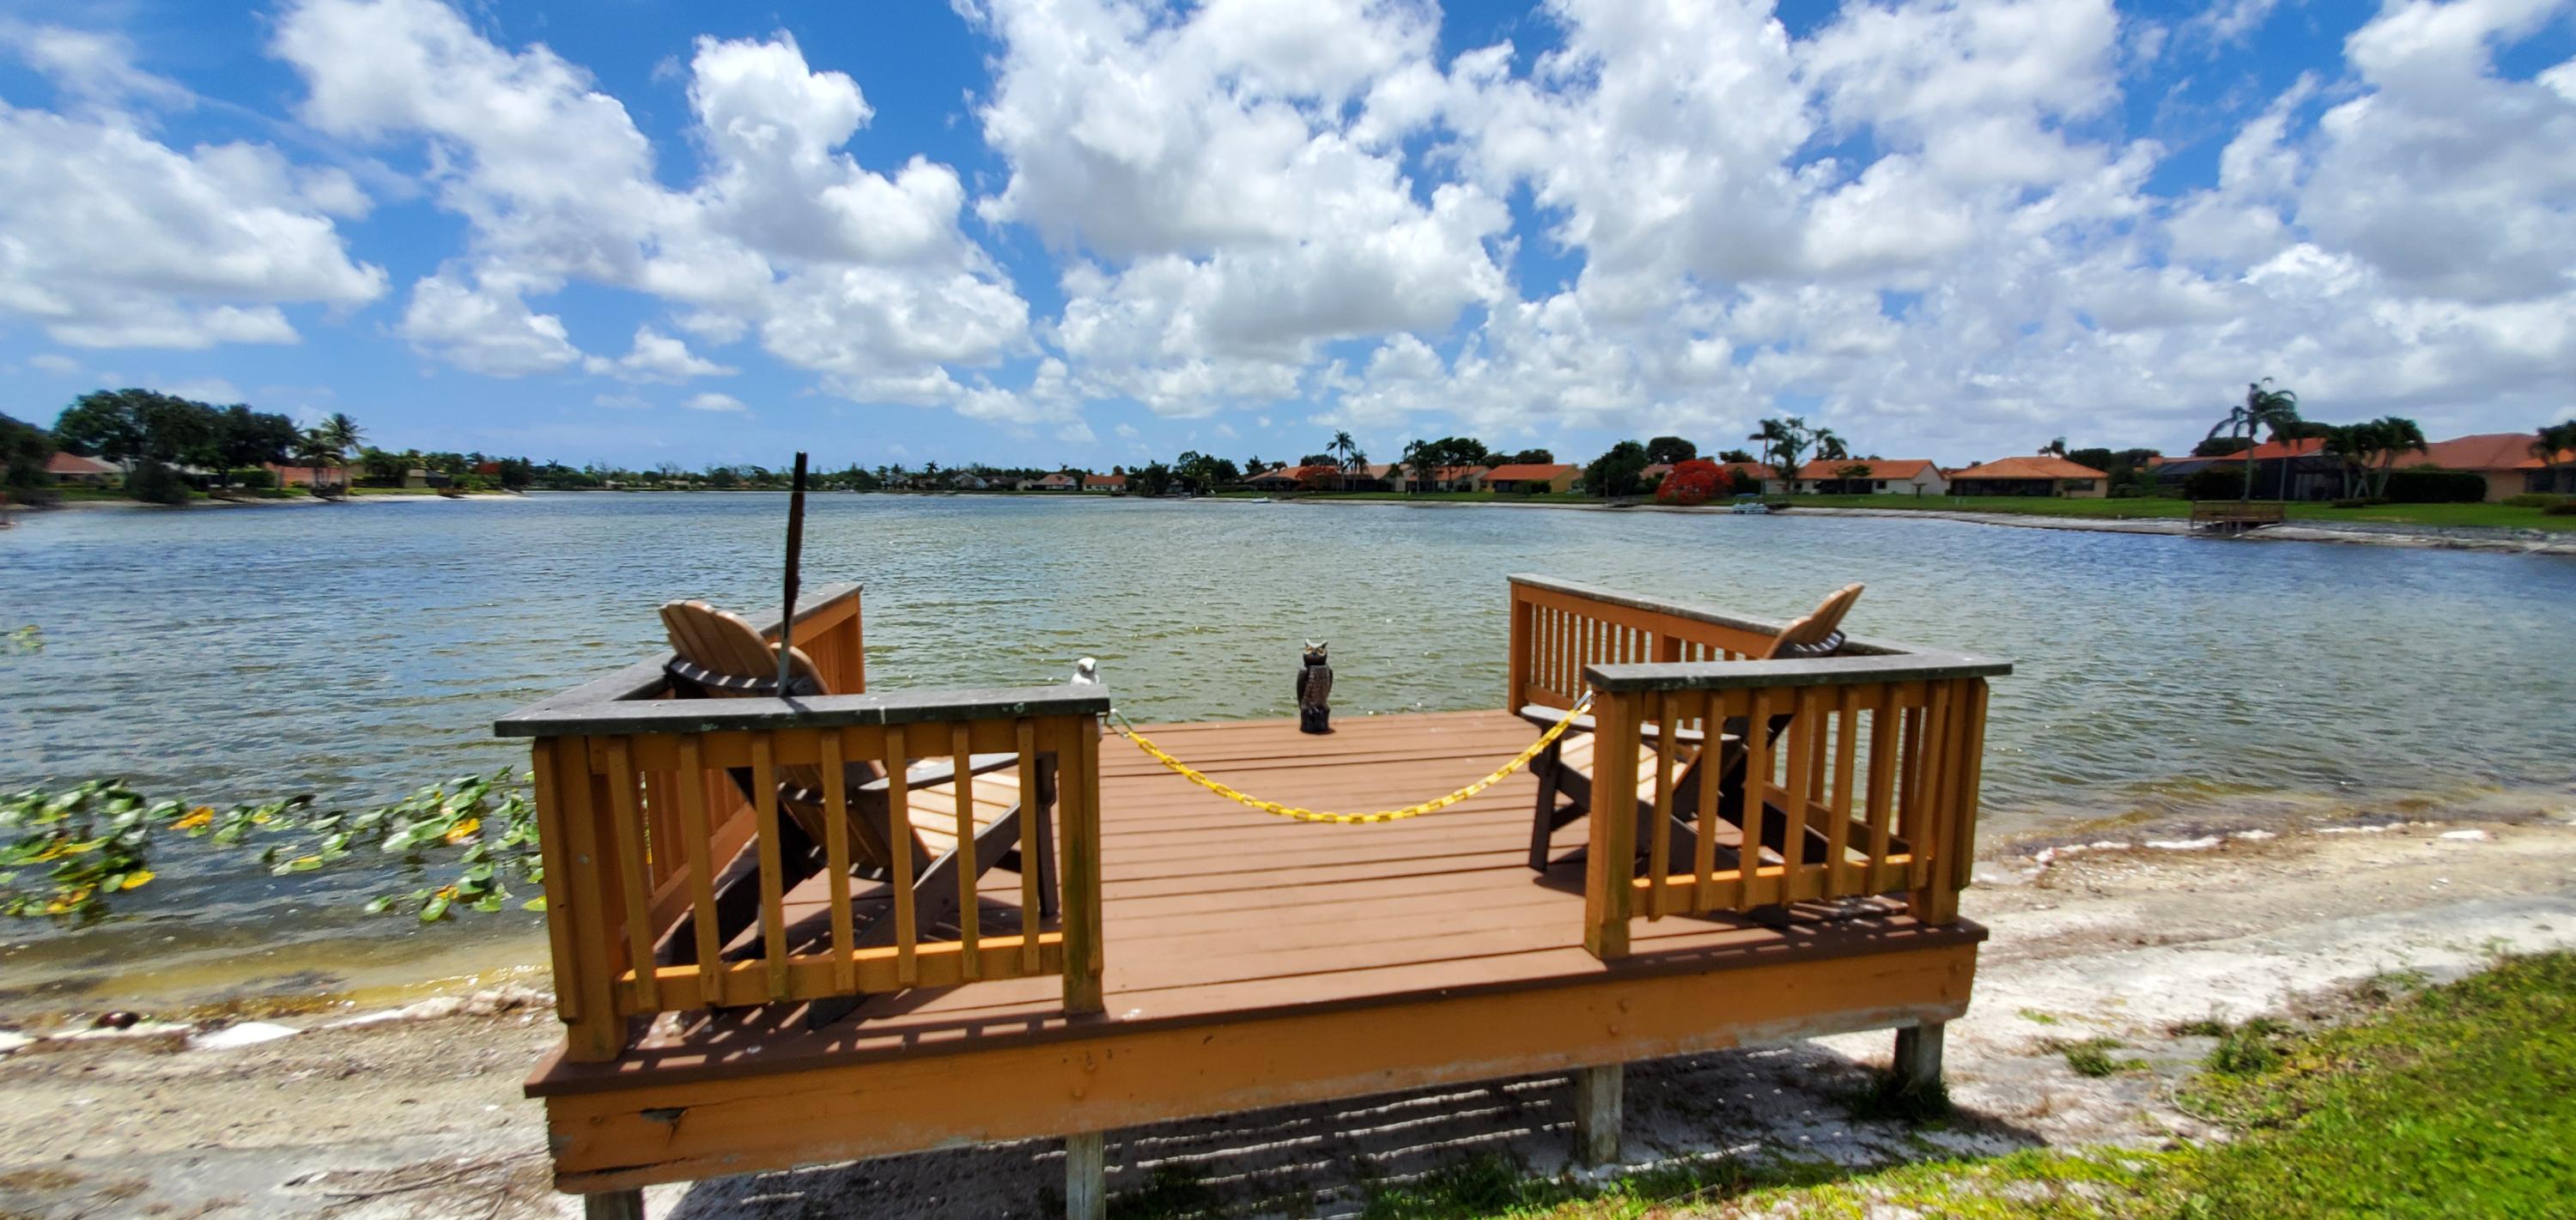 a view of a lake with boats and wooden fence